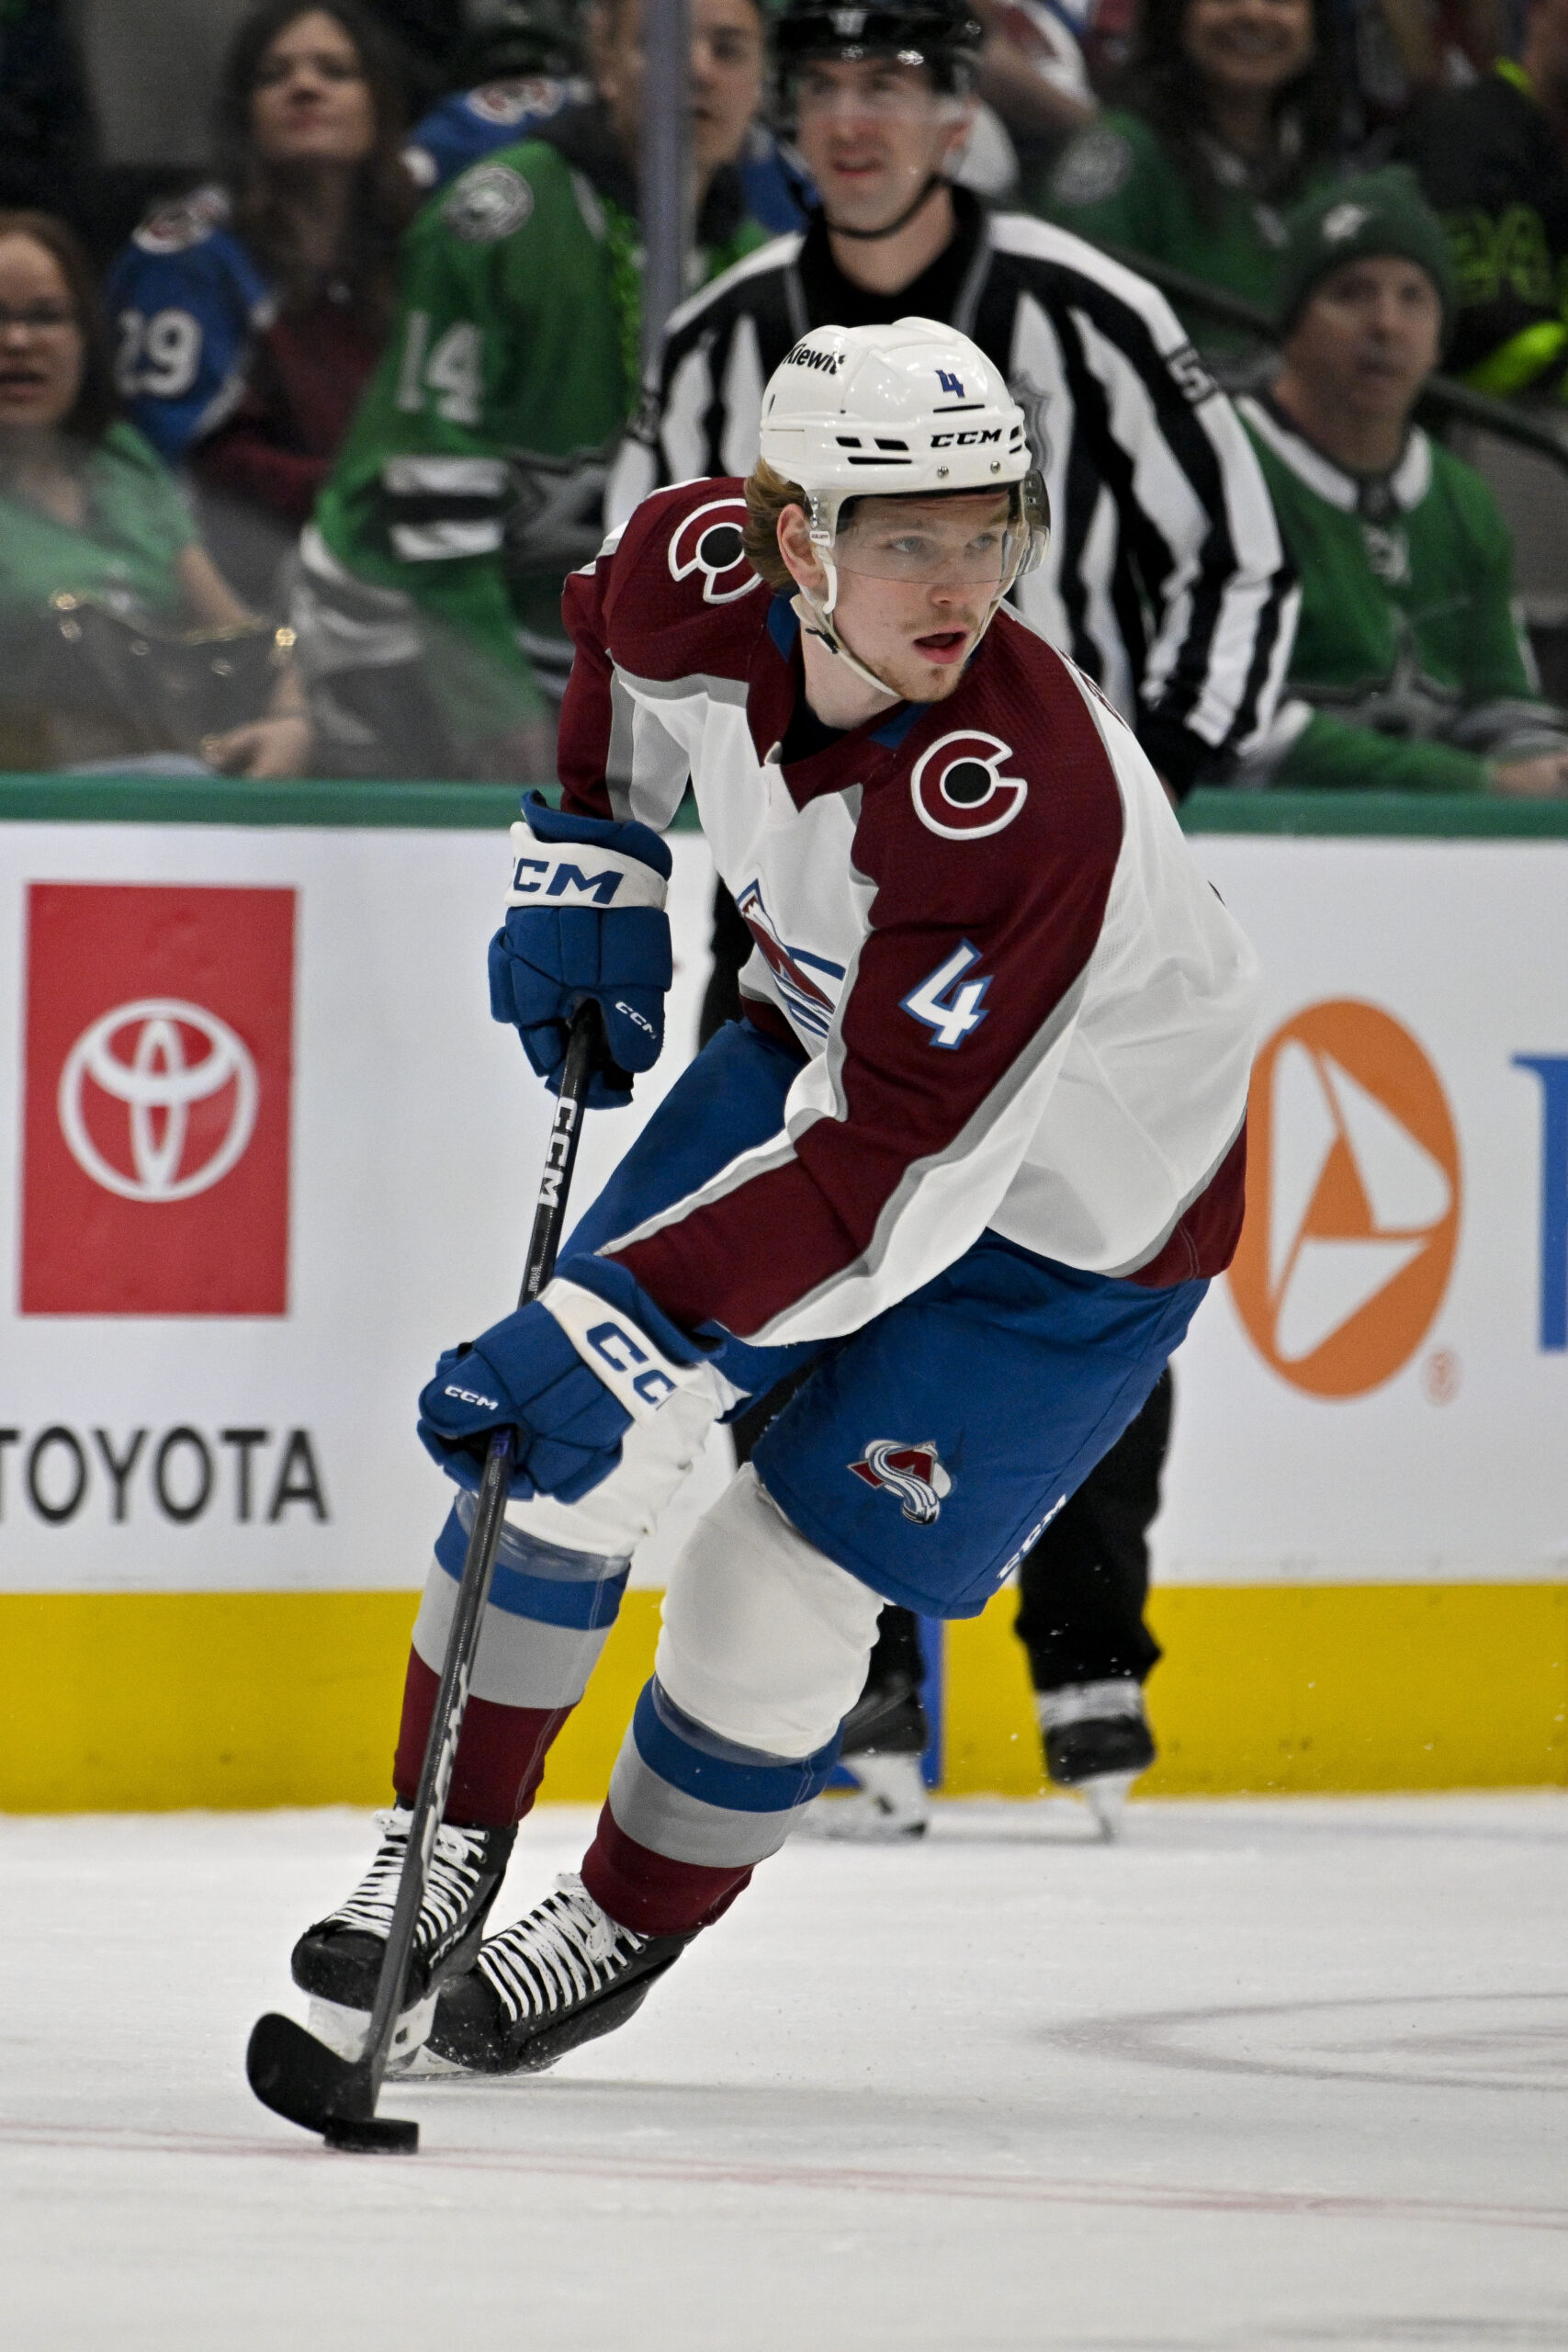 Bo is Back: Avalanche Re-Sign Byram to a 2-Year Contract